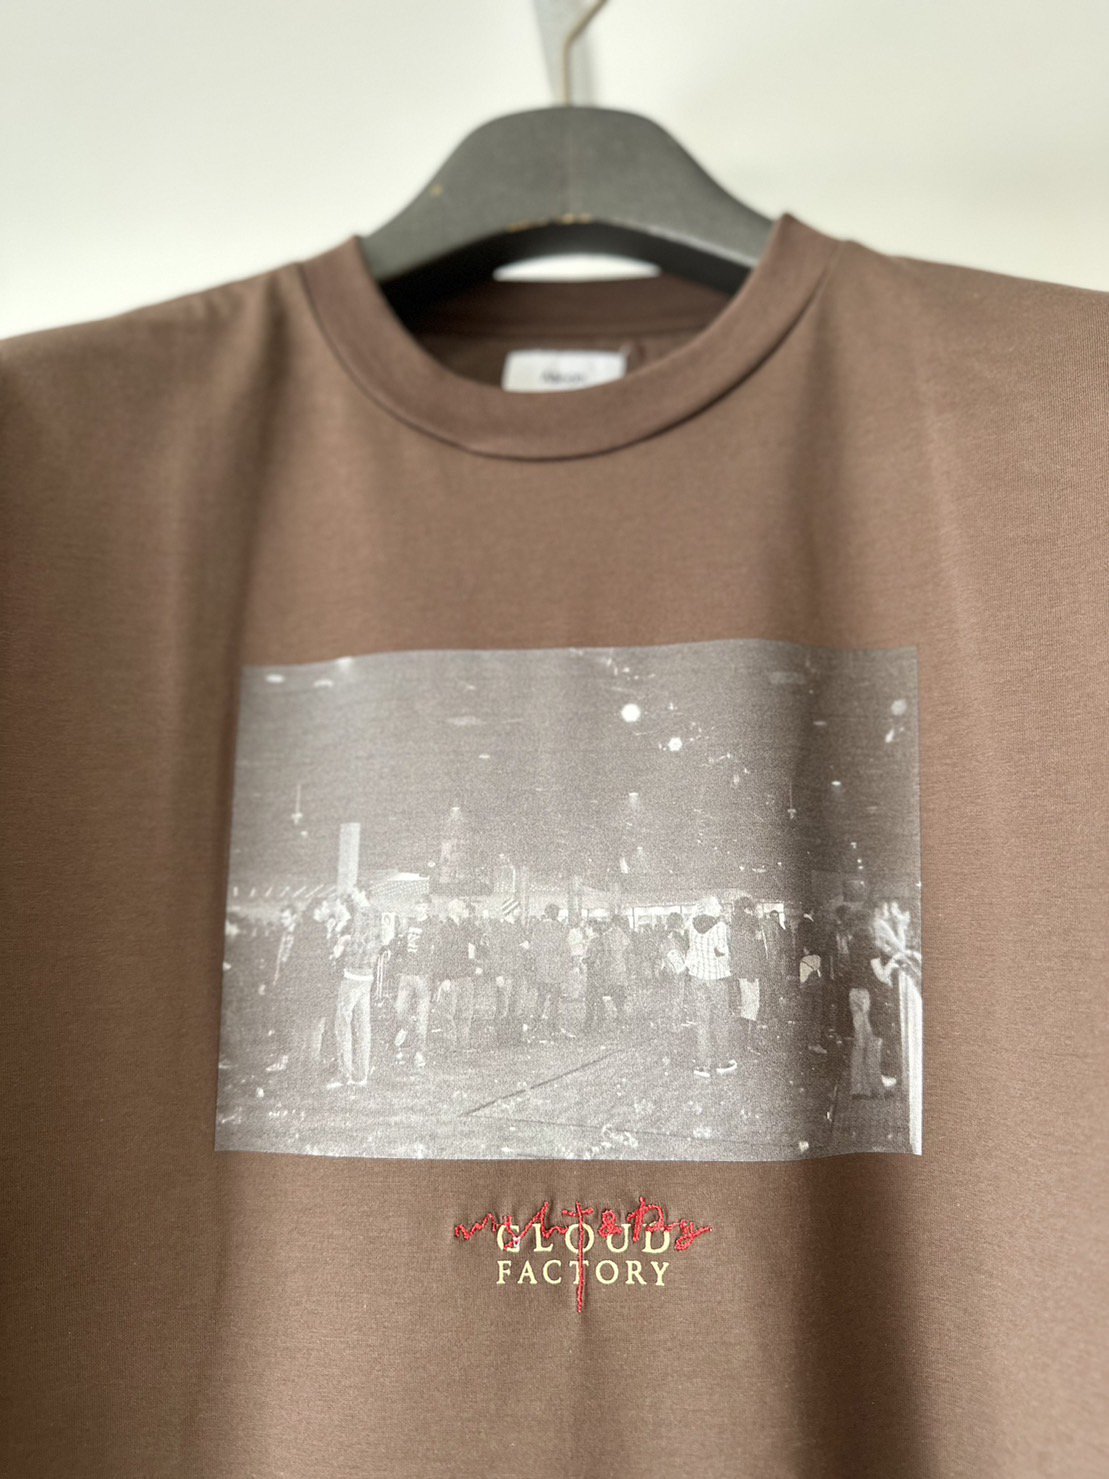 ALLEGE<br />CLOUD FACTORY Tee / Brown <img class='new_mark_img2' src='https://img.shop-pro.jp/img/new/icons14.gif' style='border:none;display:inline;margin:0px;padding:0px;width:auto;' />